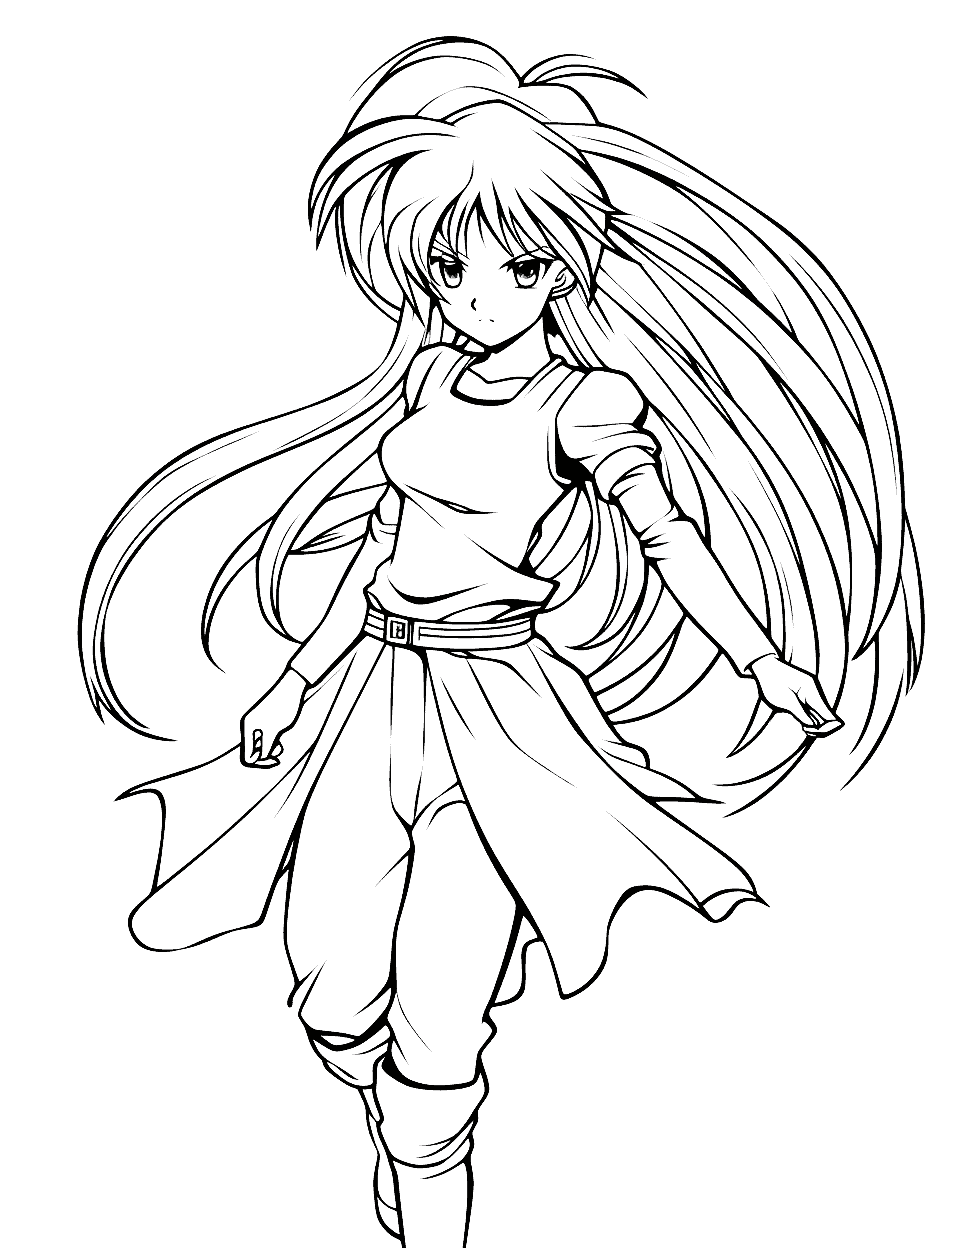 Sailor Angels Coloring Page by ParamourPhoenix on DeviantArt